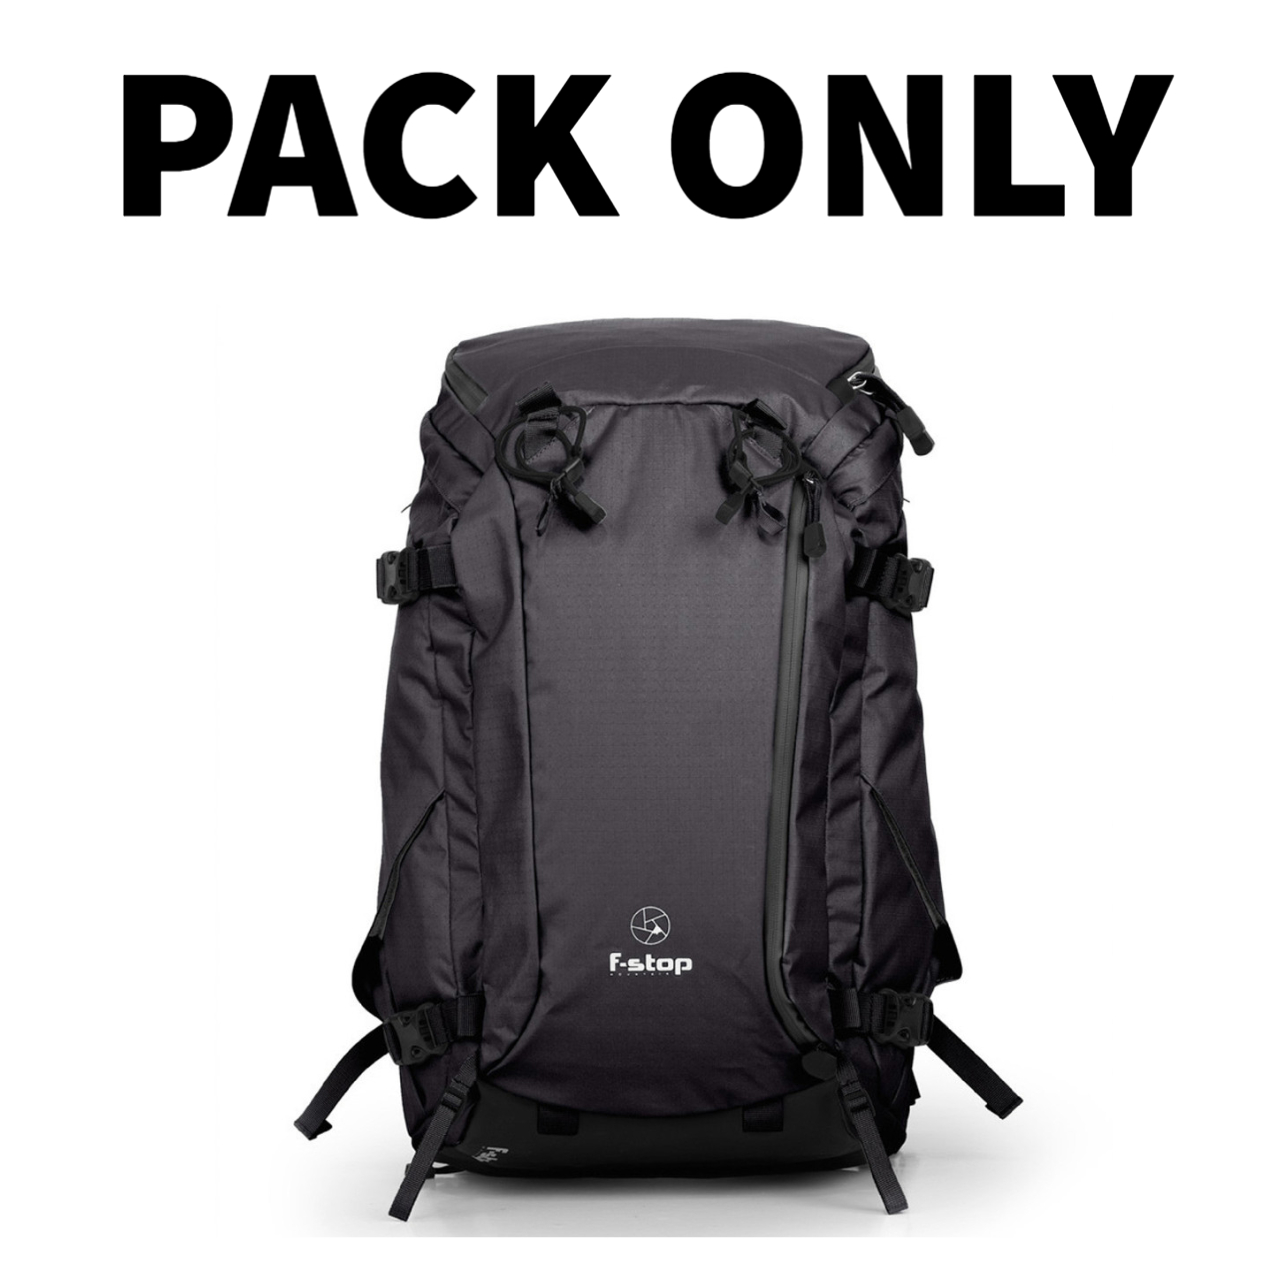 f-stop Lotus 32 liter camera backpack Pack Only Bundle in the Anthracite Black color